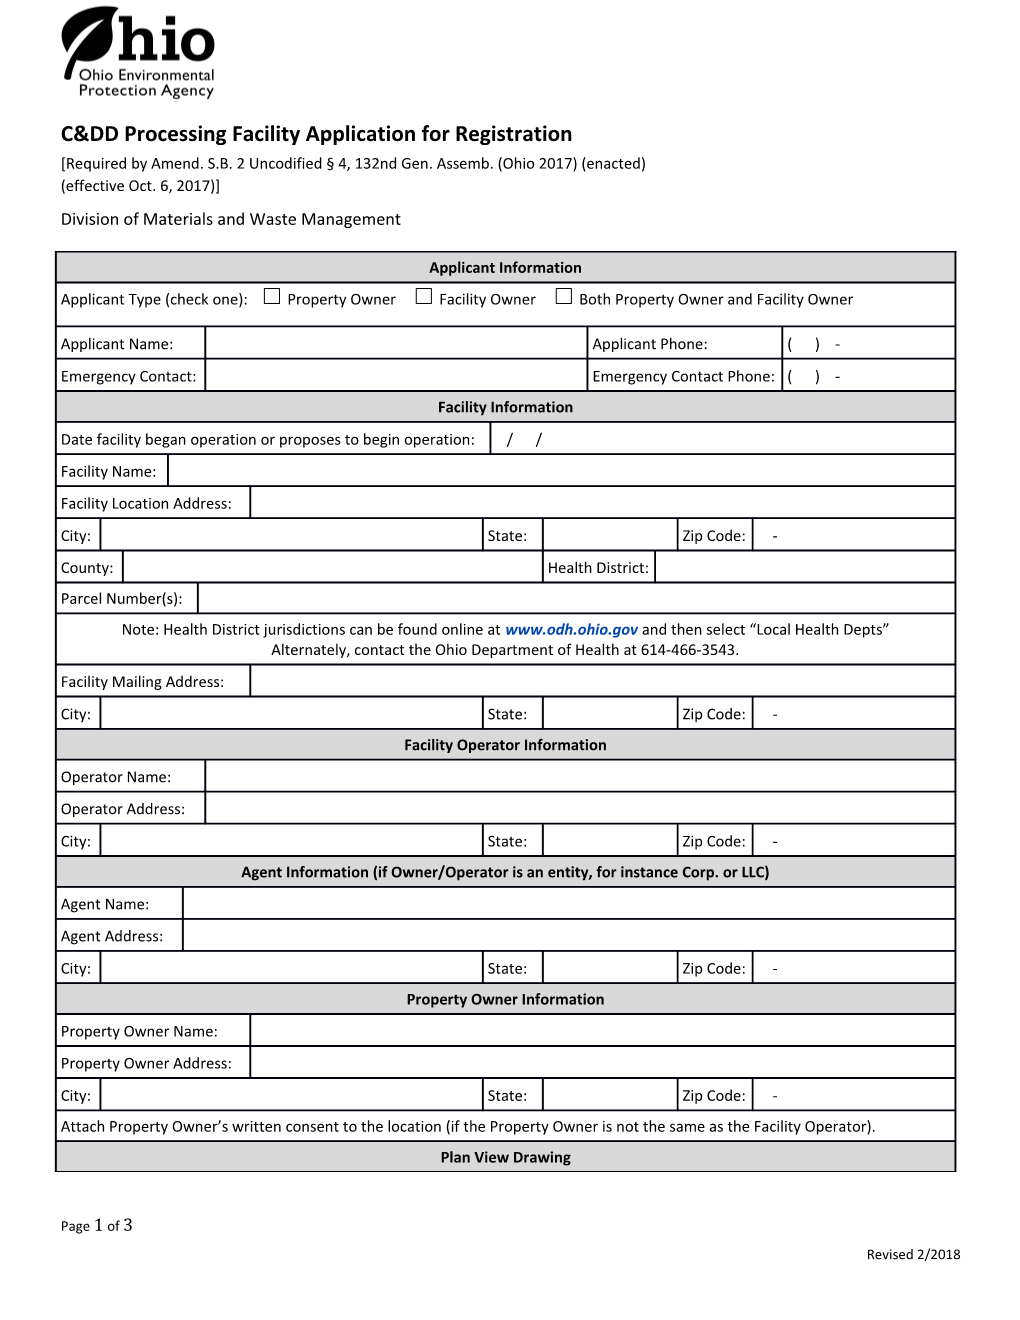 Ohio Environmental Protection Agency - C&DD Processing Facility Application for Registration